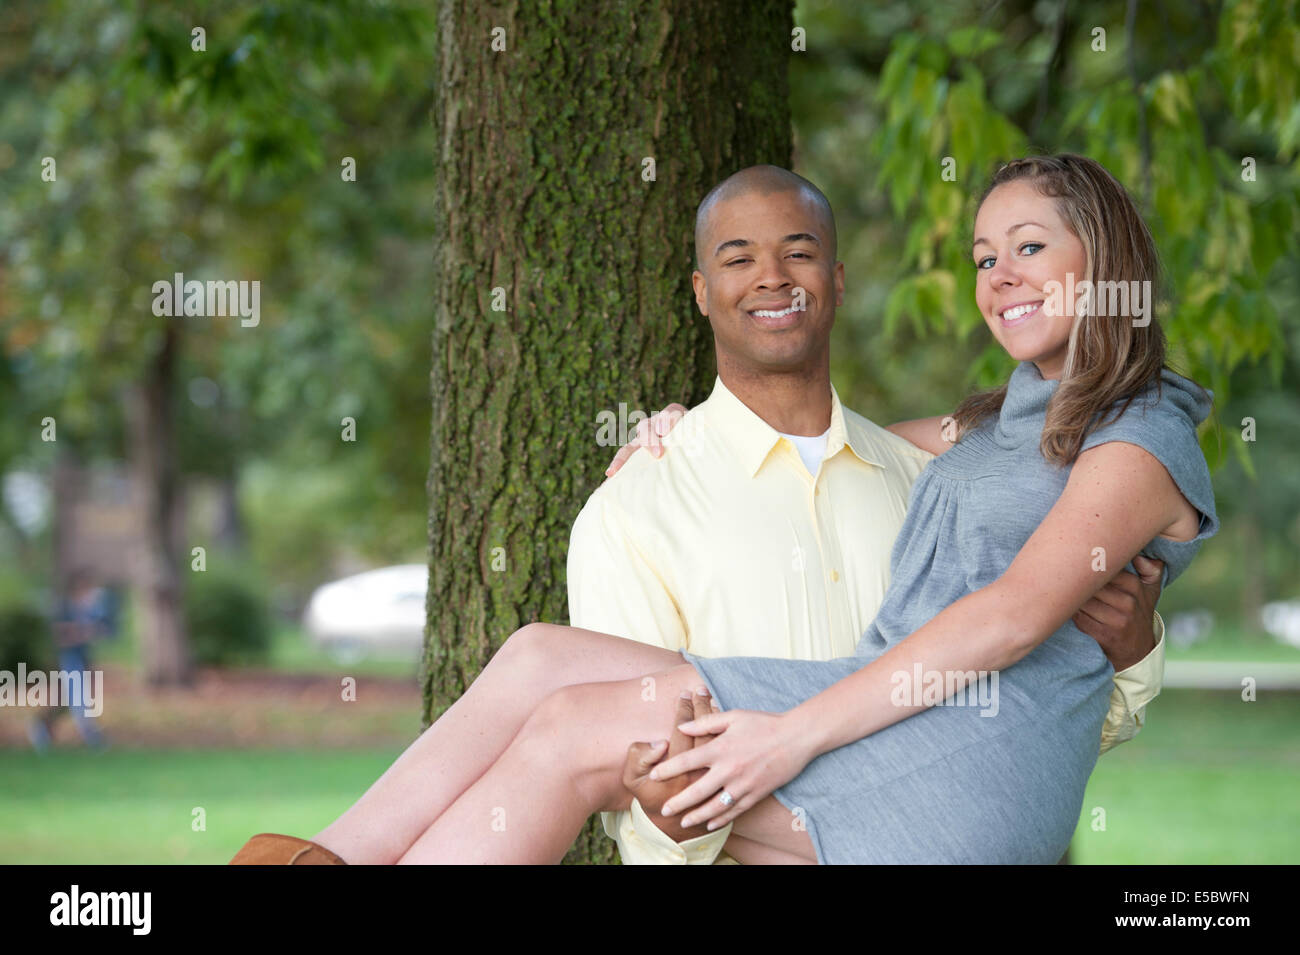 A beautiful, happy and young interracial couple posing next to a tree on a sunny day. Stock Photo